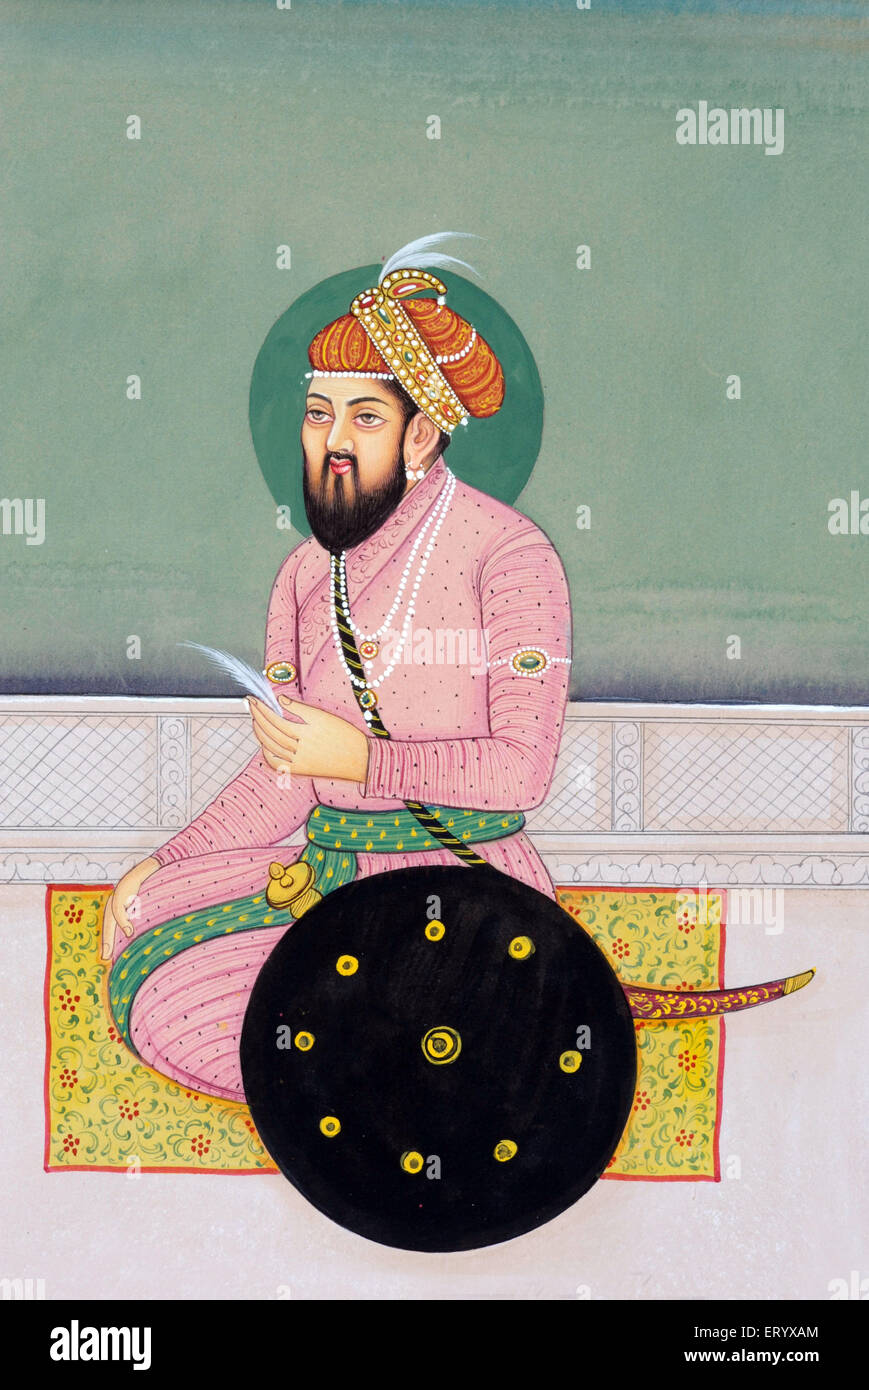 Babur, Zahir ud Din Muhammad, Mughal Empire Founder, Mughal dynasty first Emperor, miniature painting, India, Asia Stock Photo